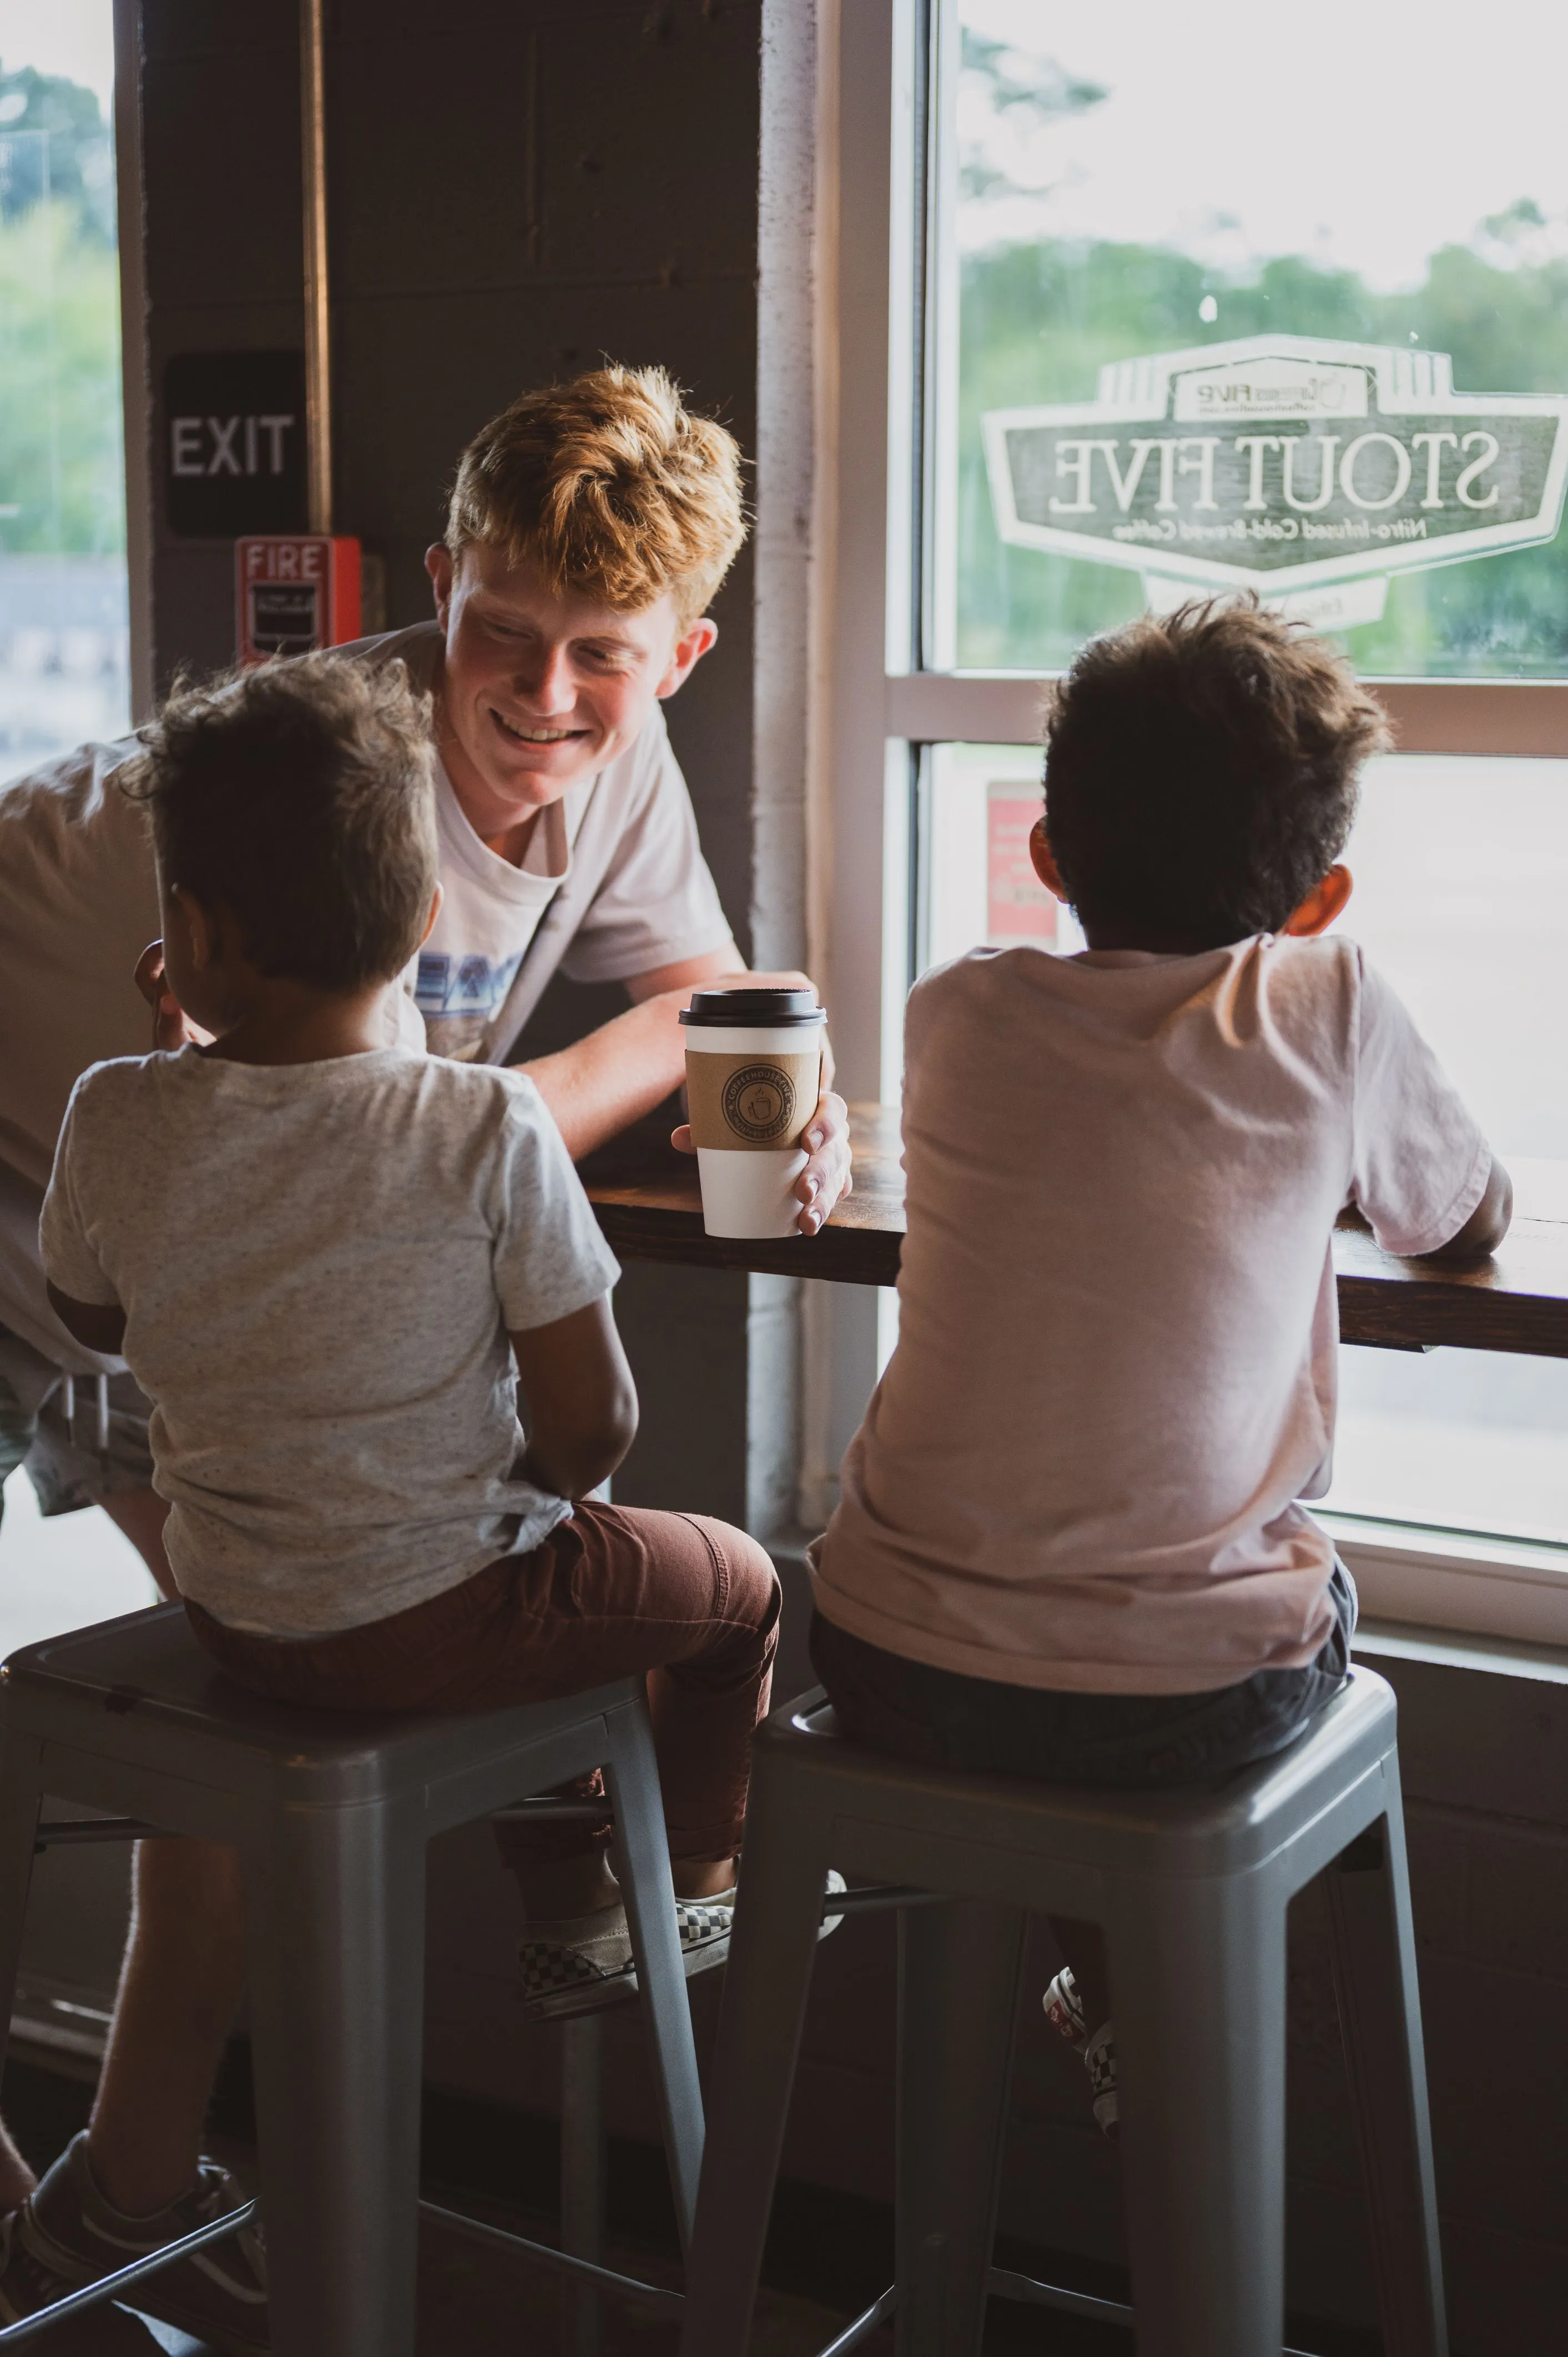 A smiling person sitting on a stool at a café bar next to two children facing a window with a "Southrive" sign, holding a takeout coffee cup.